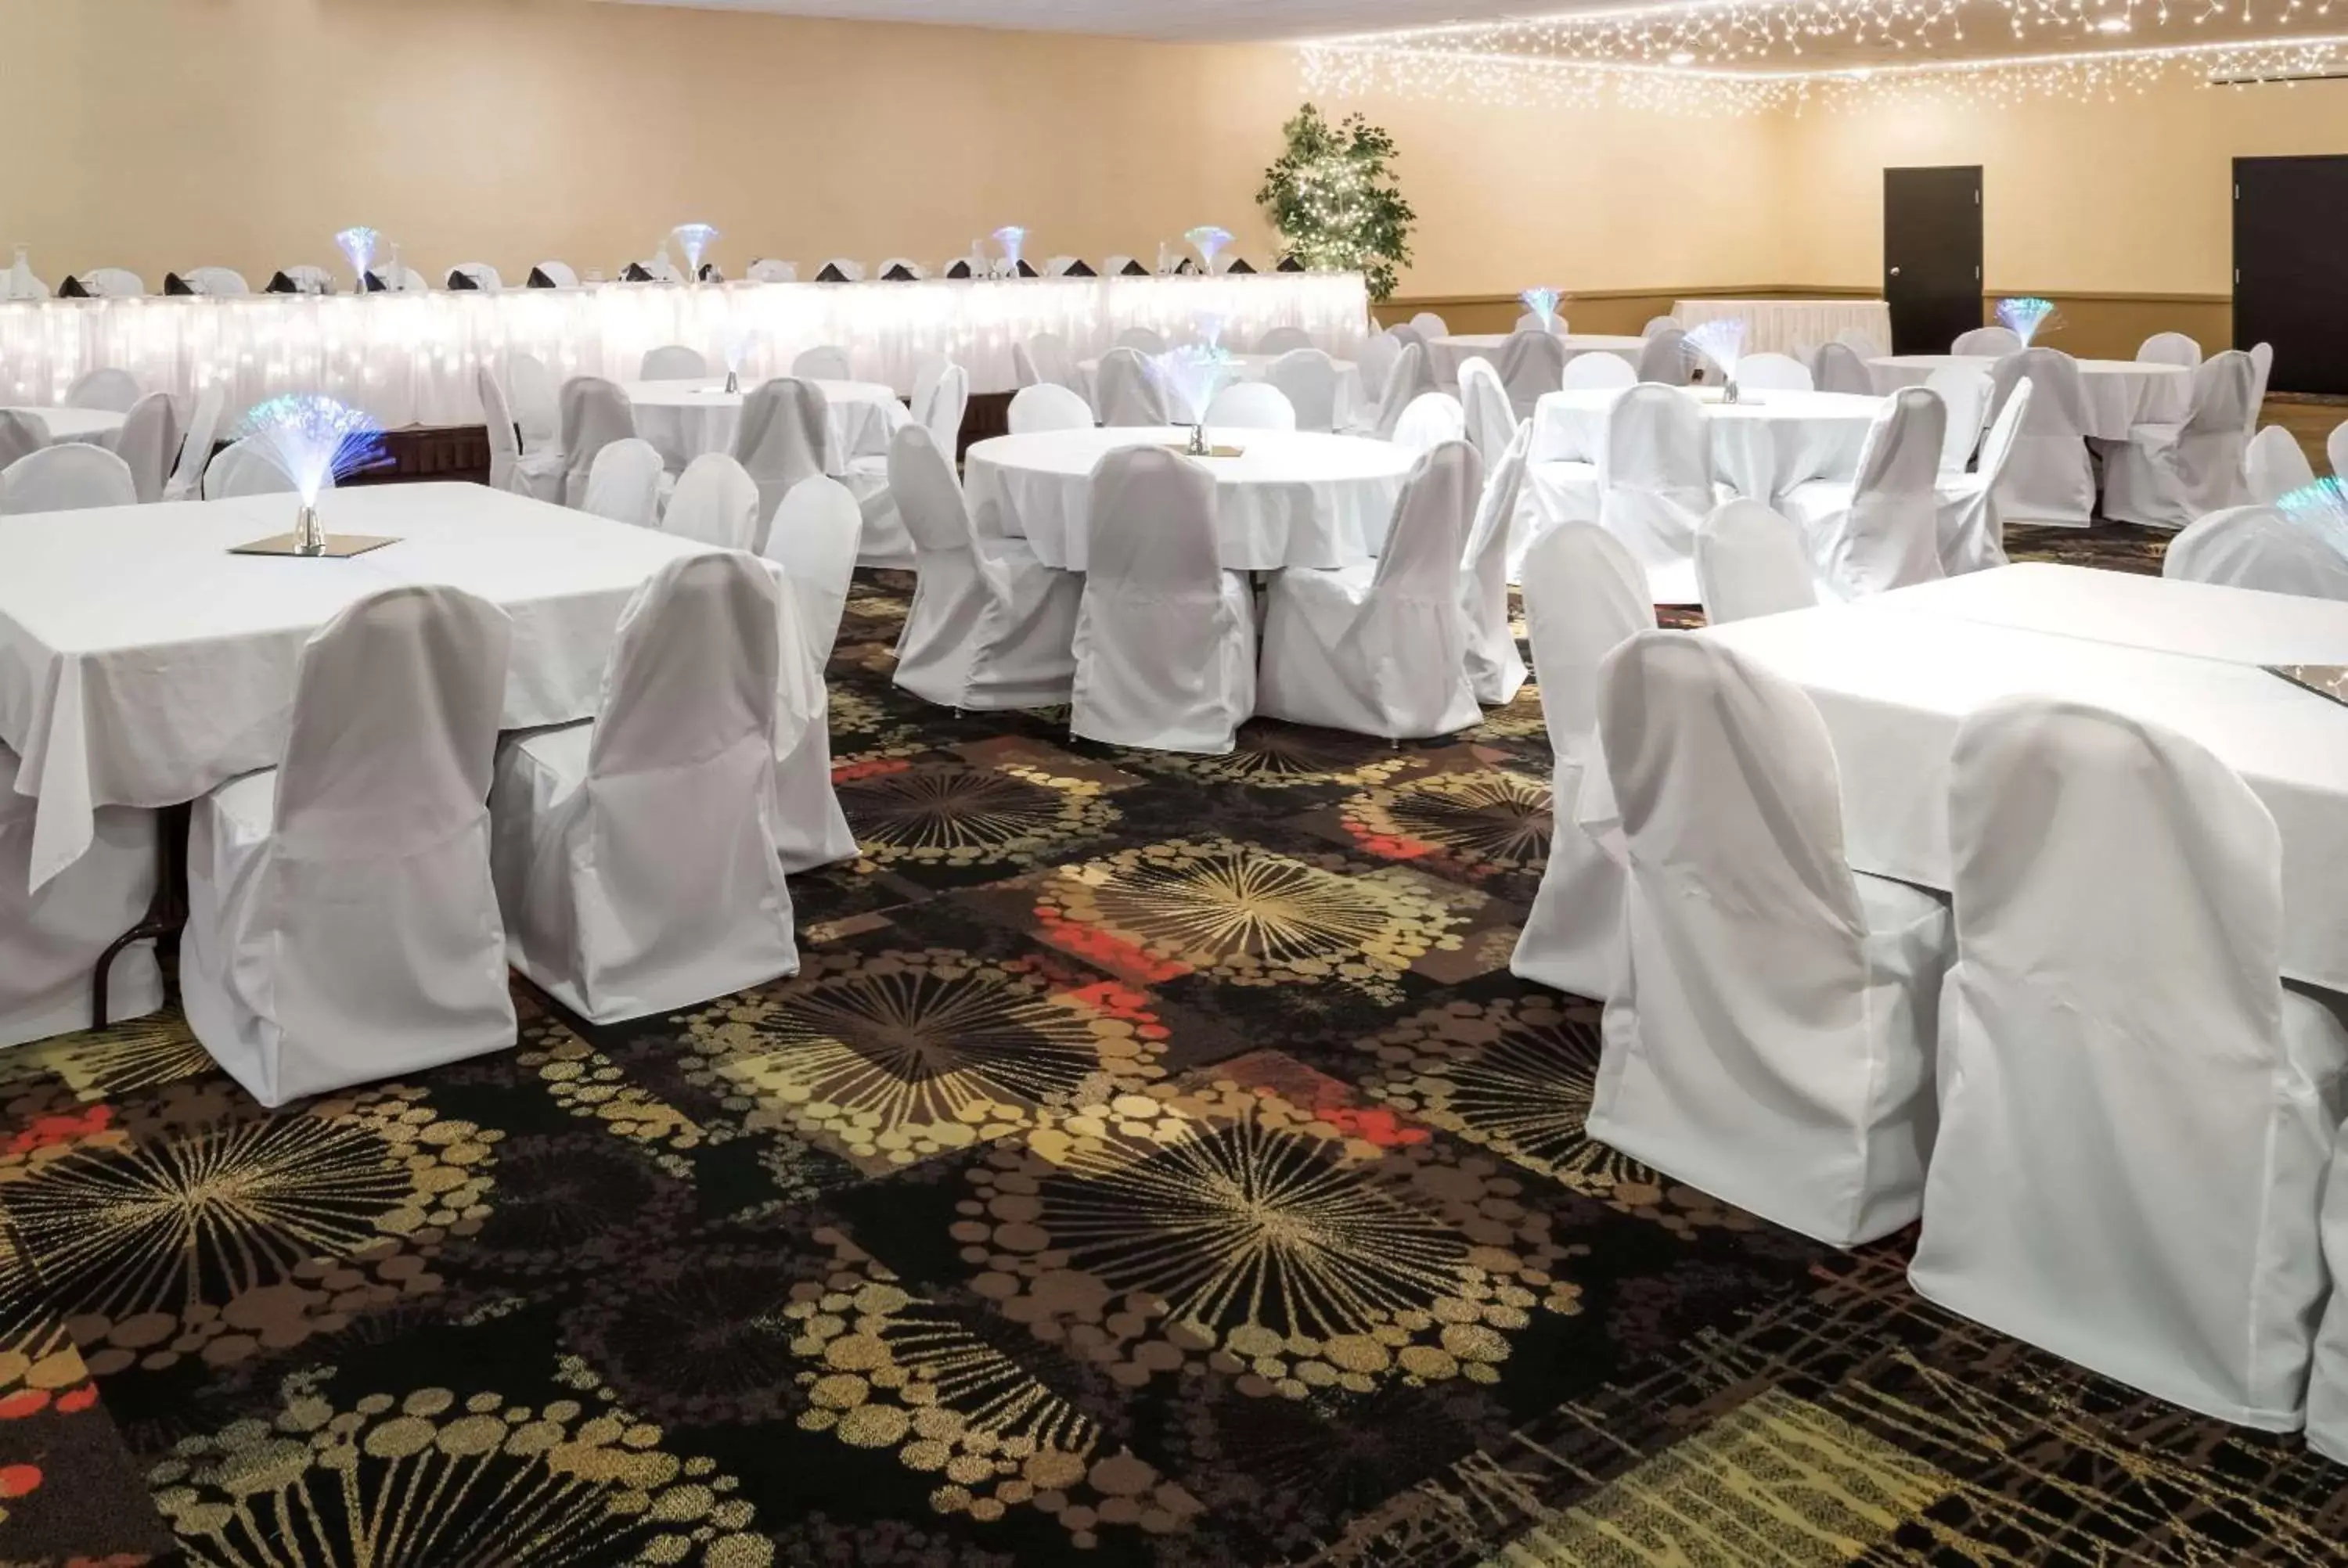 On site, Banquet Facilities in Ramada by Wyndham Grand Forks